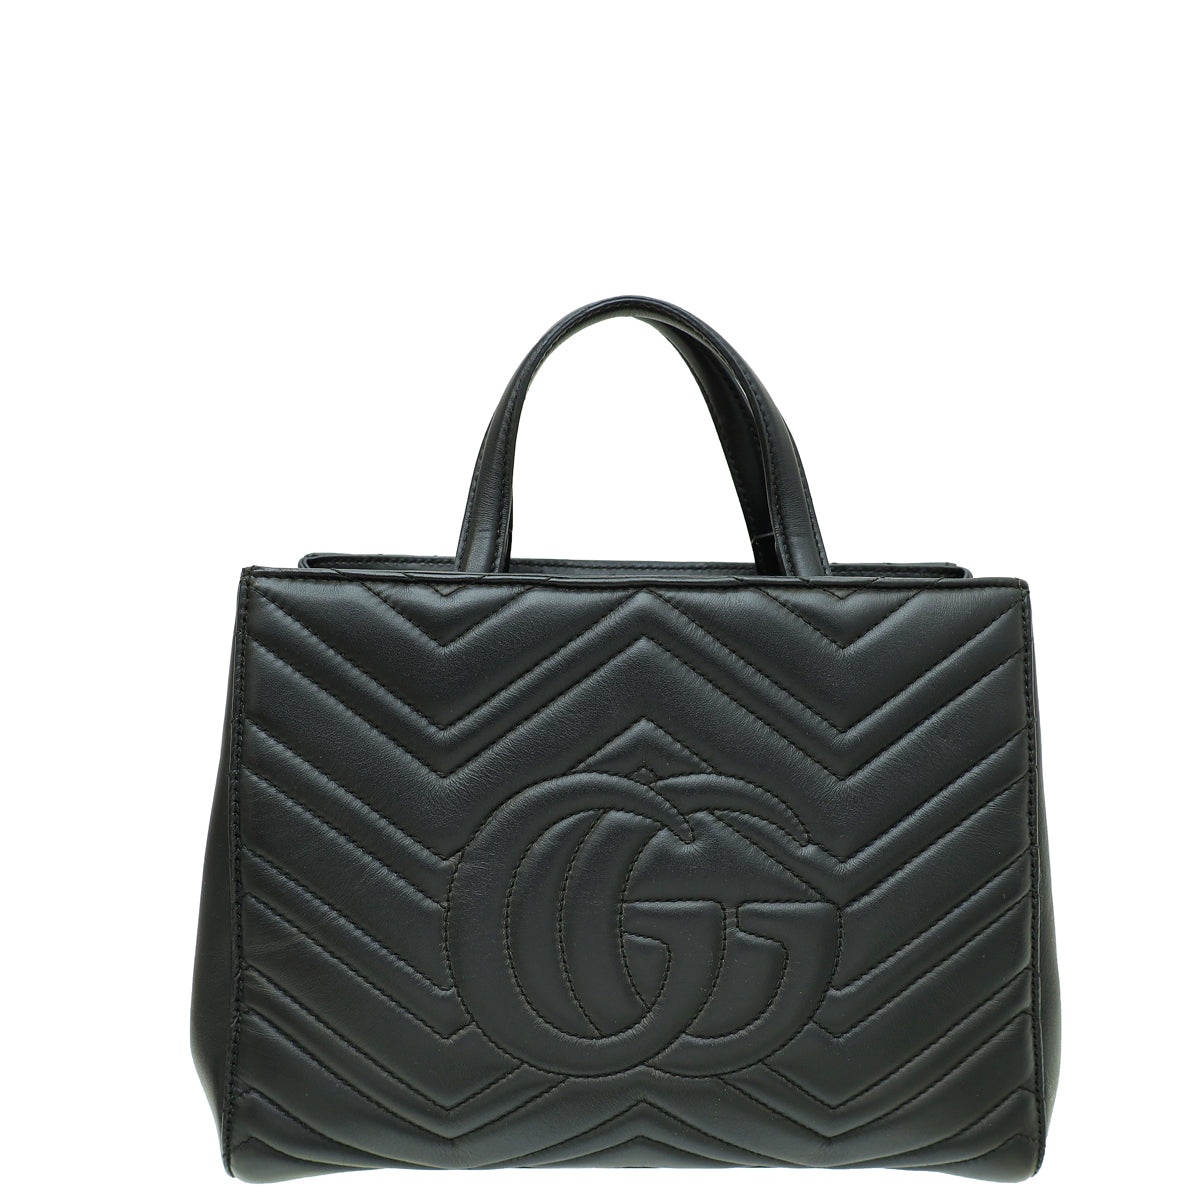 Gucci Black GG Marmont Top Handle Tote Small Bag